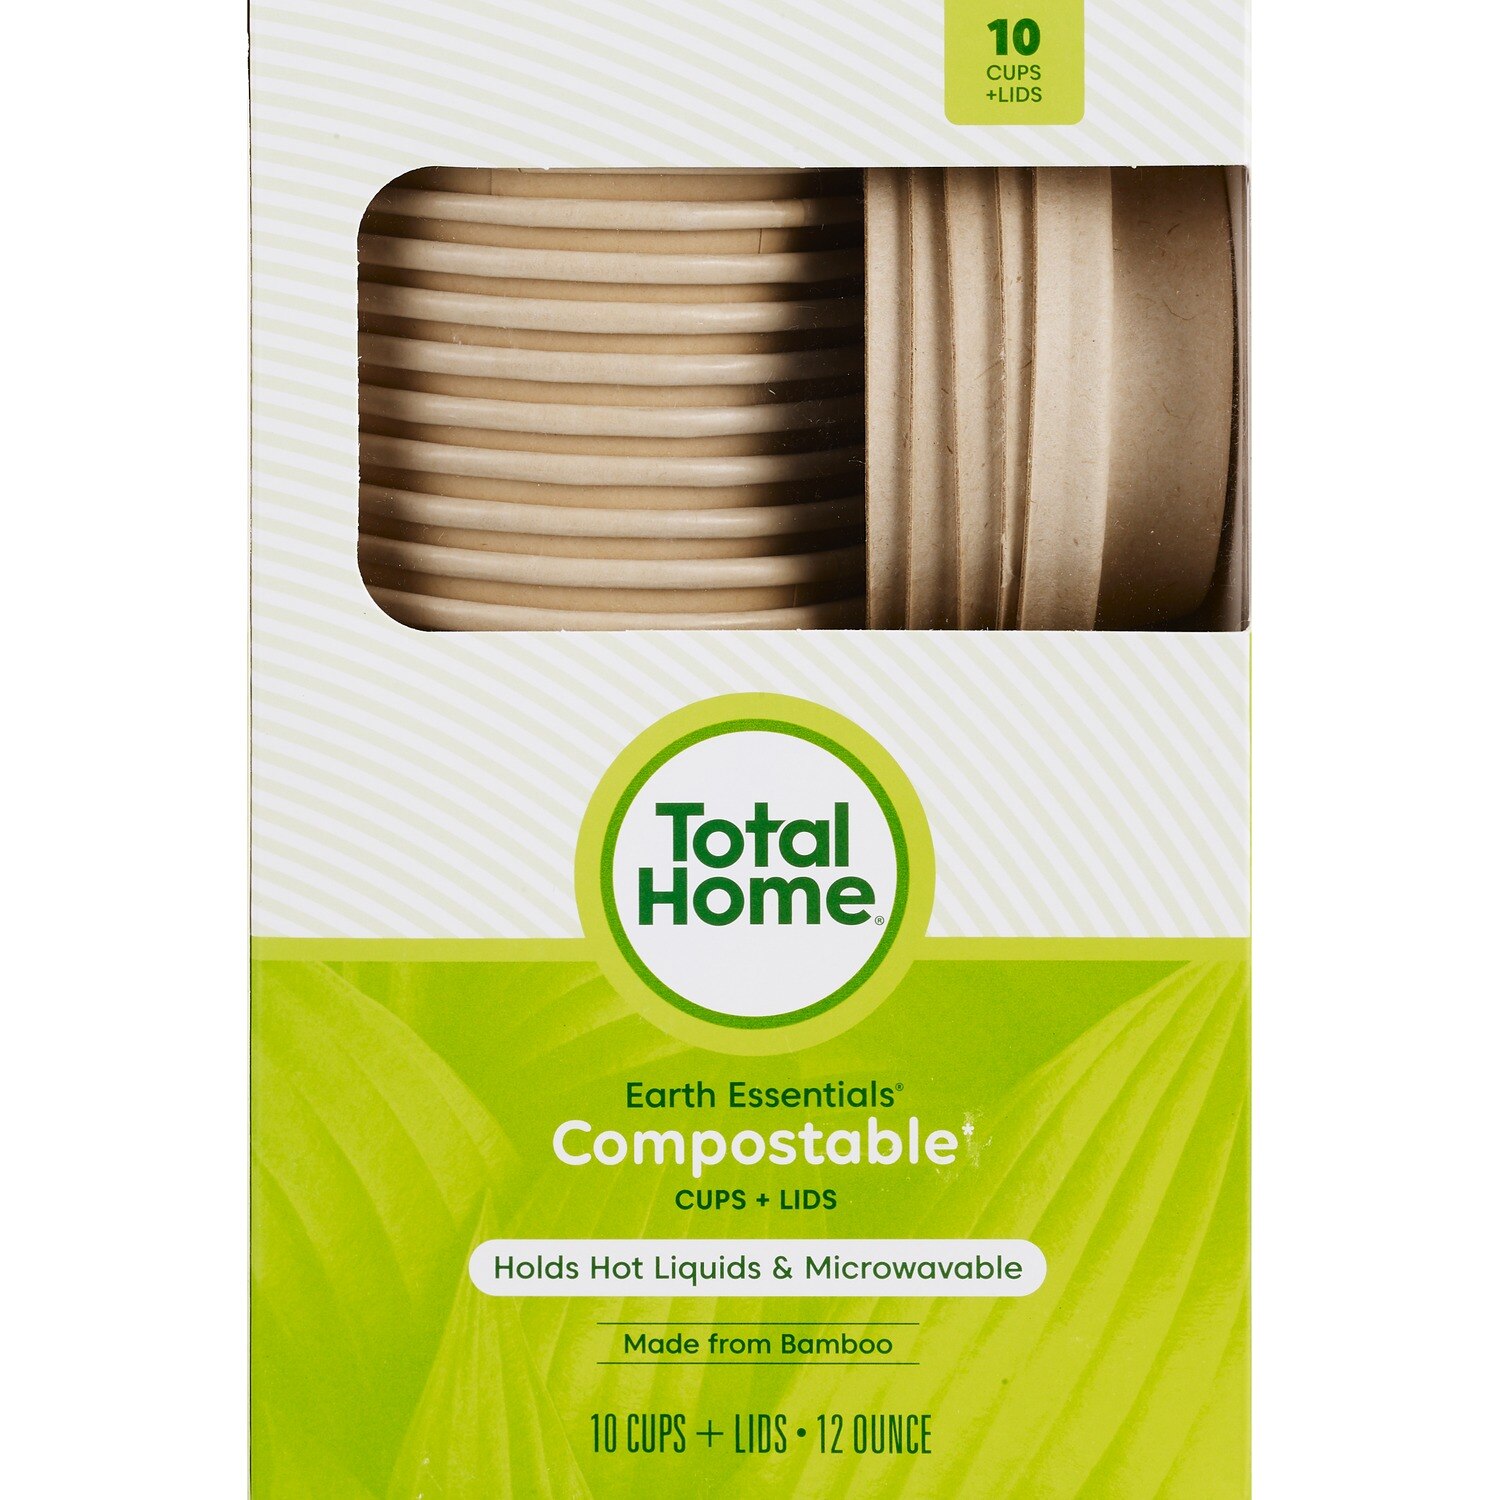 Total Home Earth Essentials Compostable Bamboo Hot Beverage Cups and Lids, 12oz, 10 CT